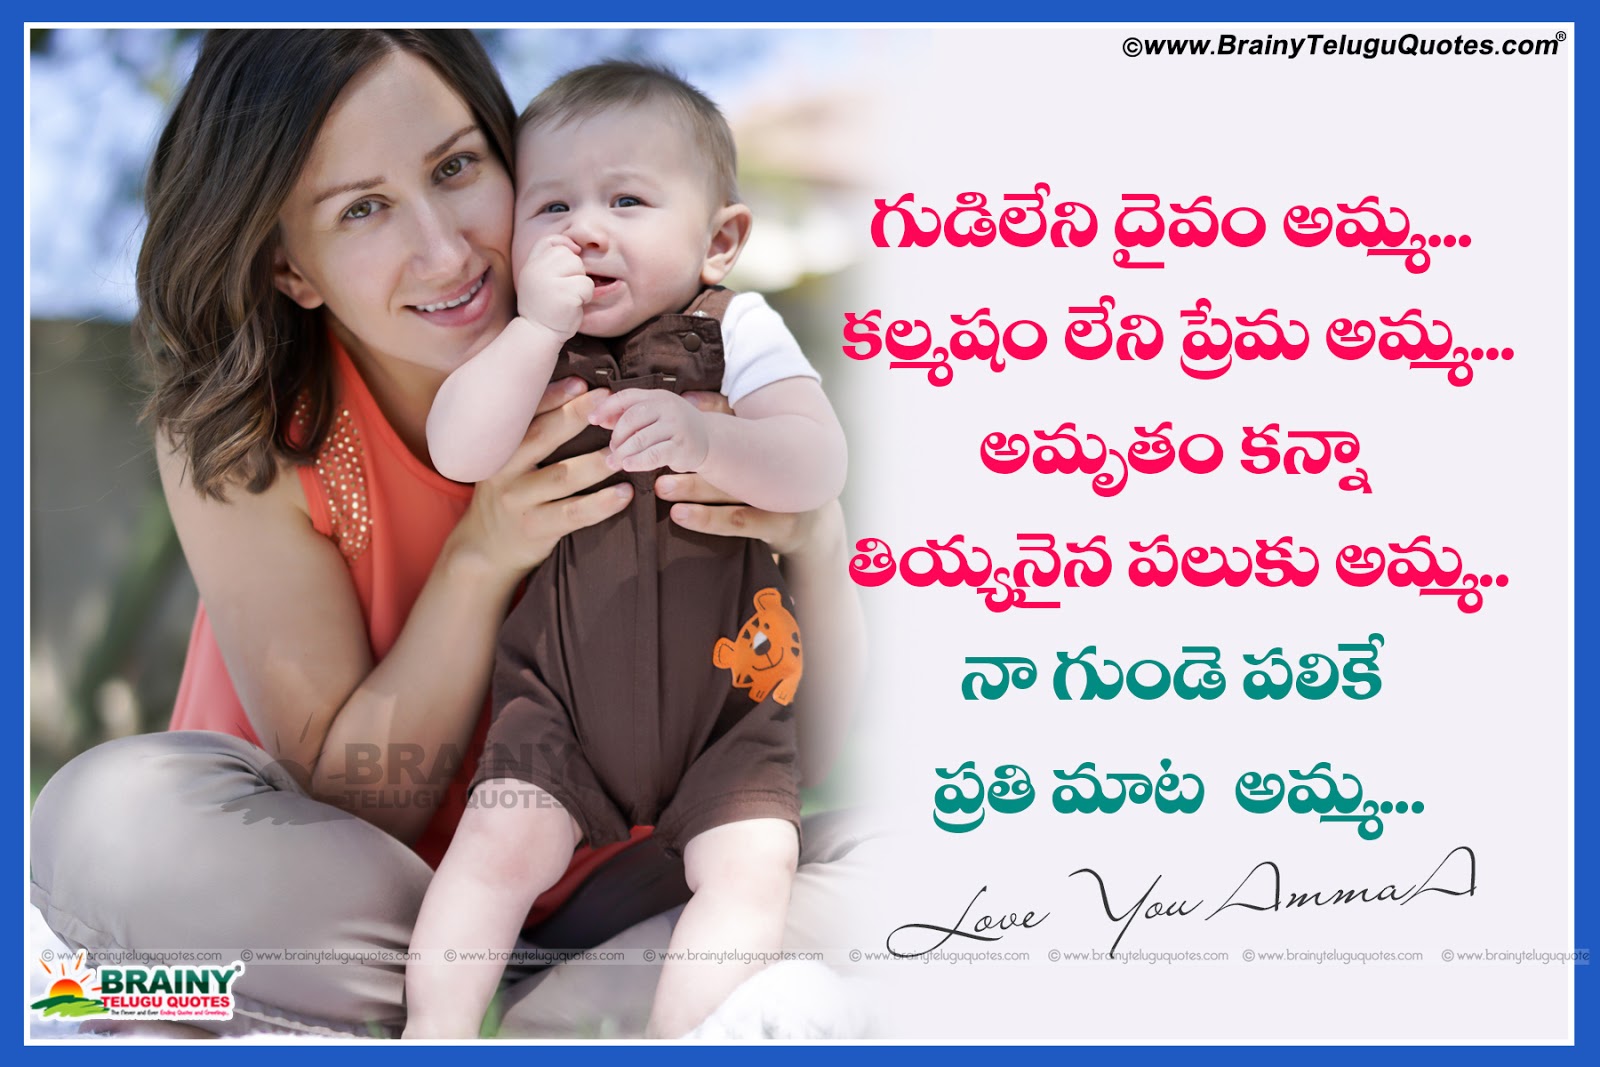 Открытка для день матери in Telugu. About mother. Love your mother not girls quotation. My mother best friend